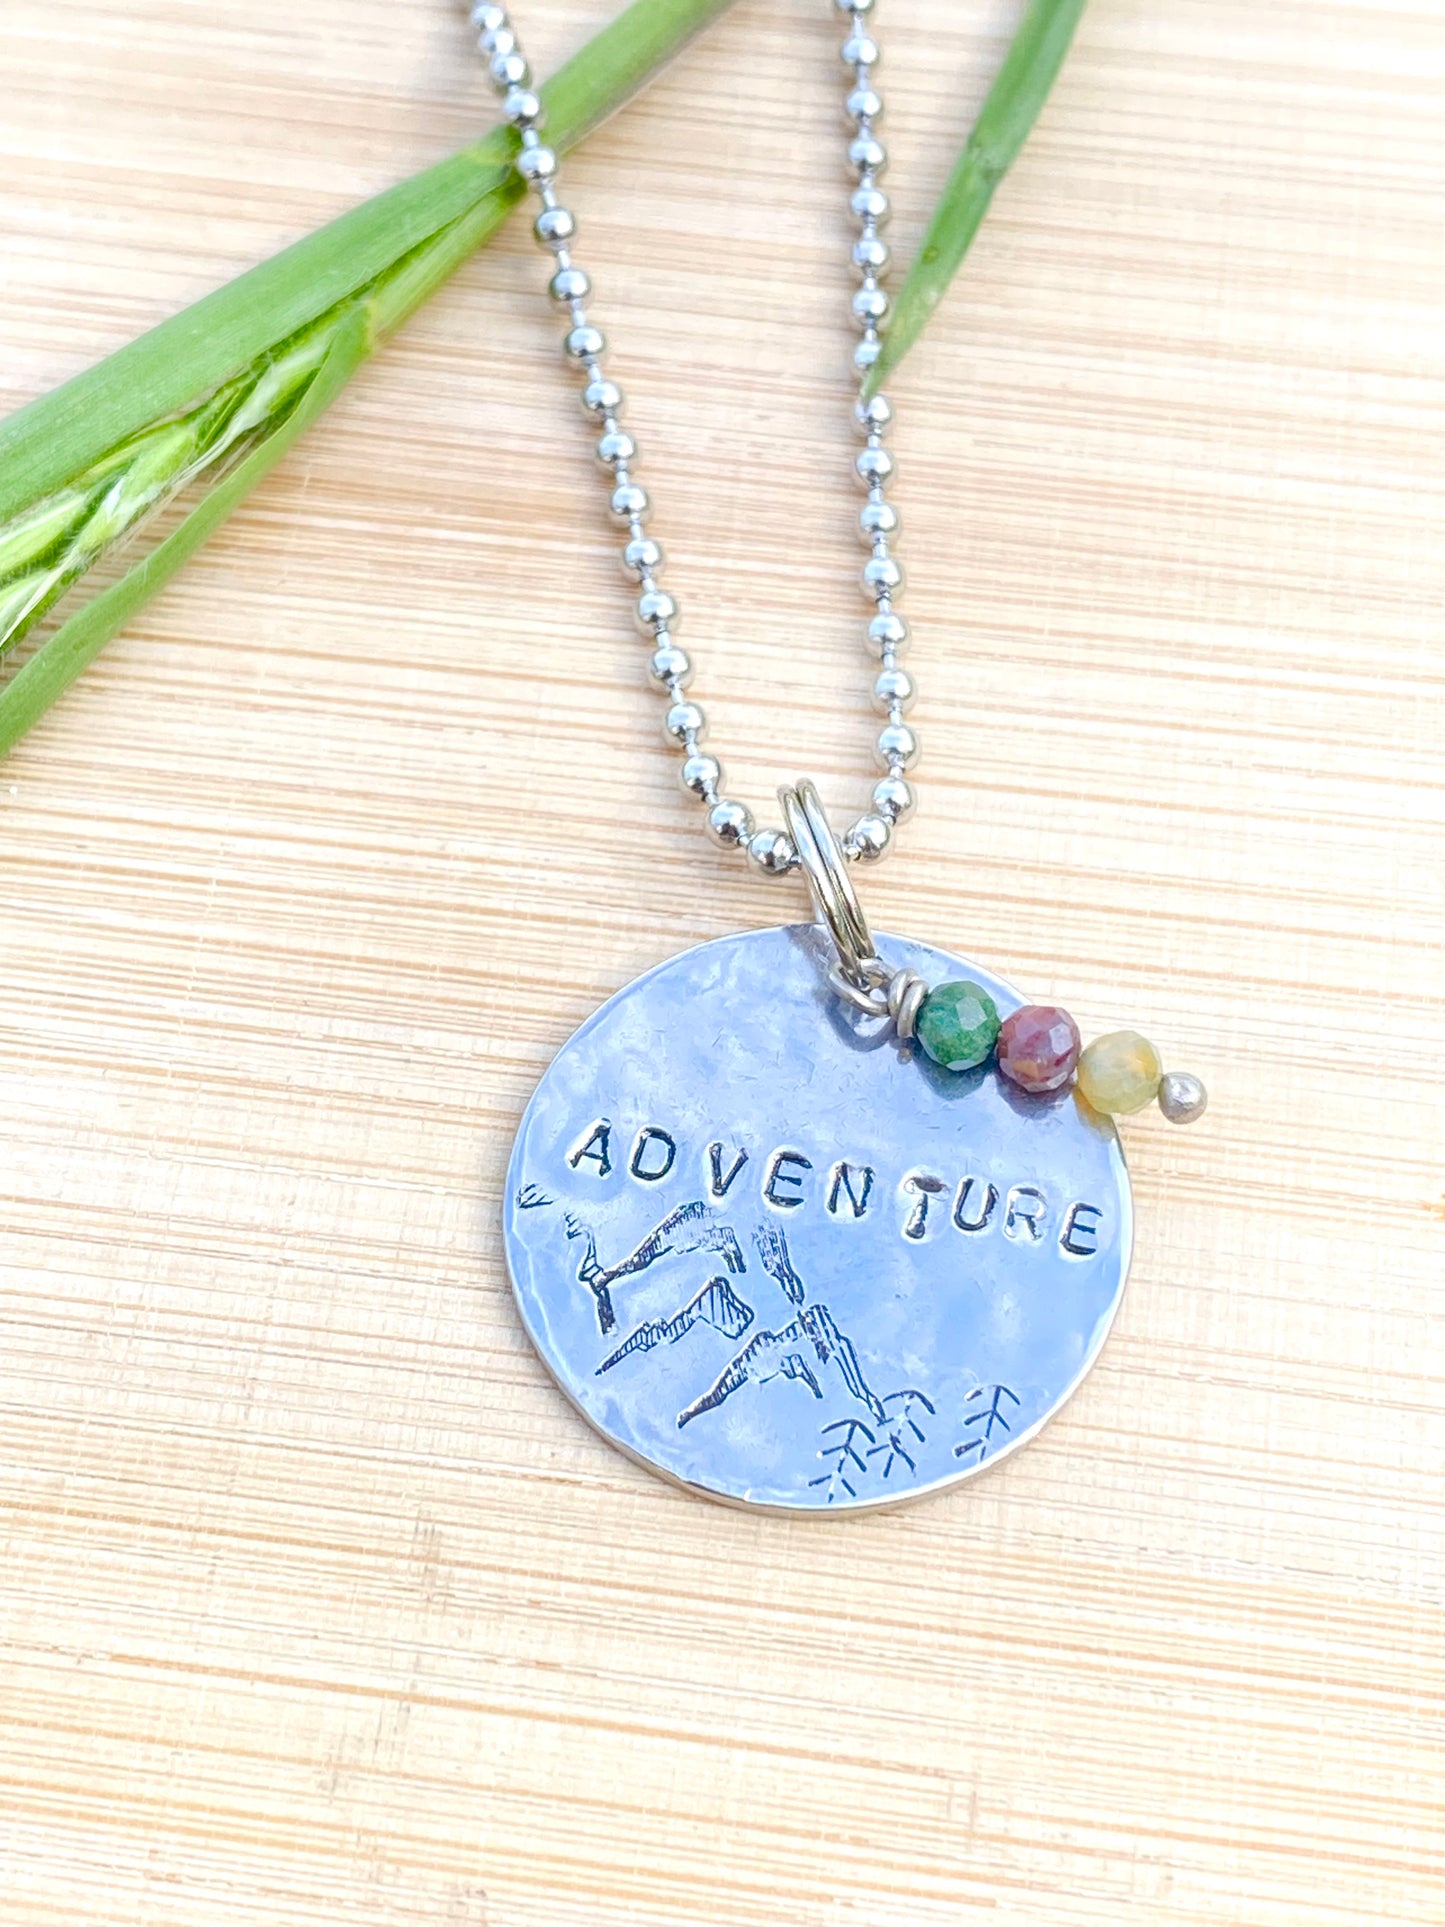 Adventure Stamped Necklace